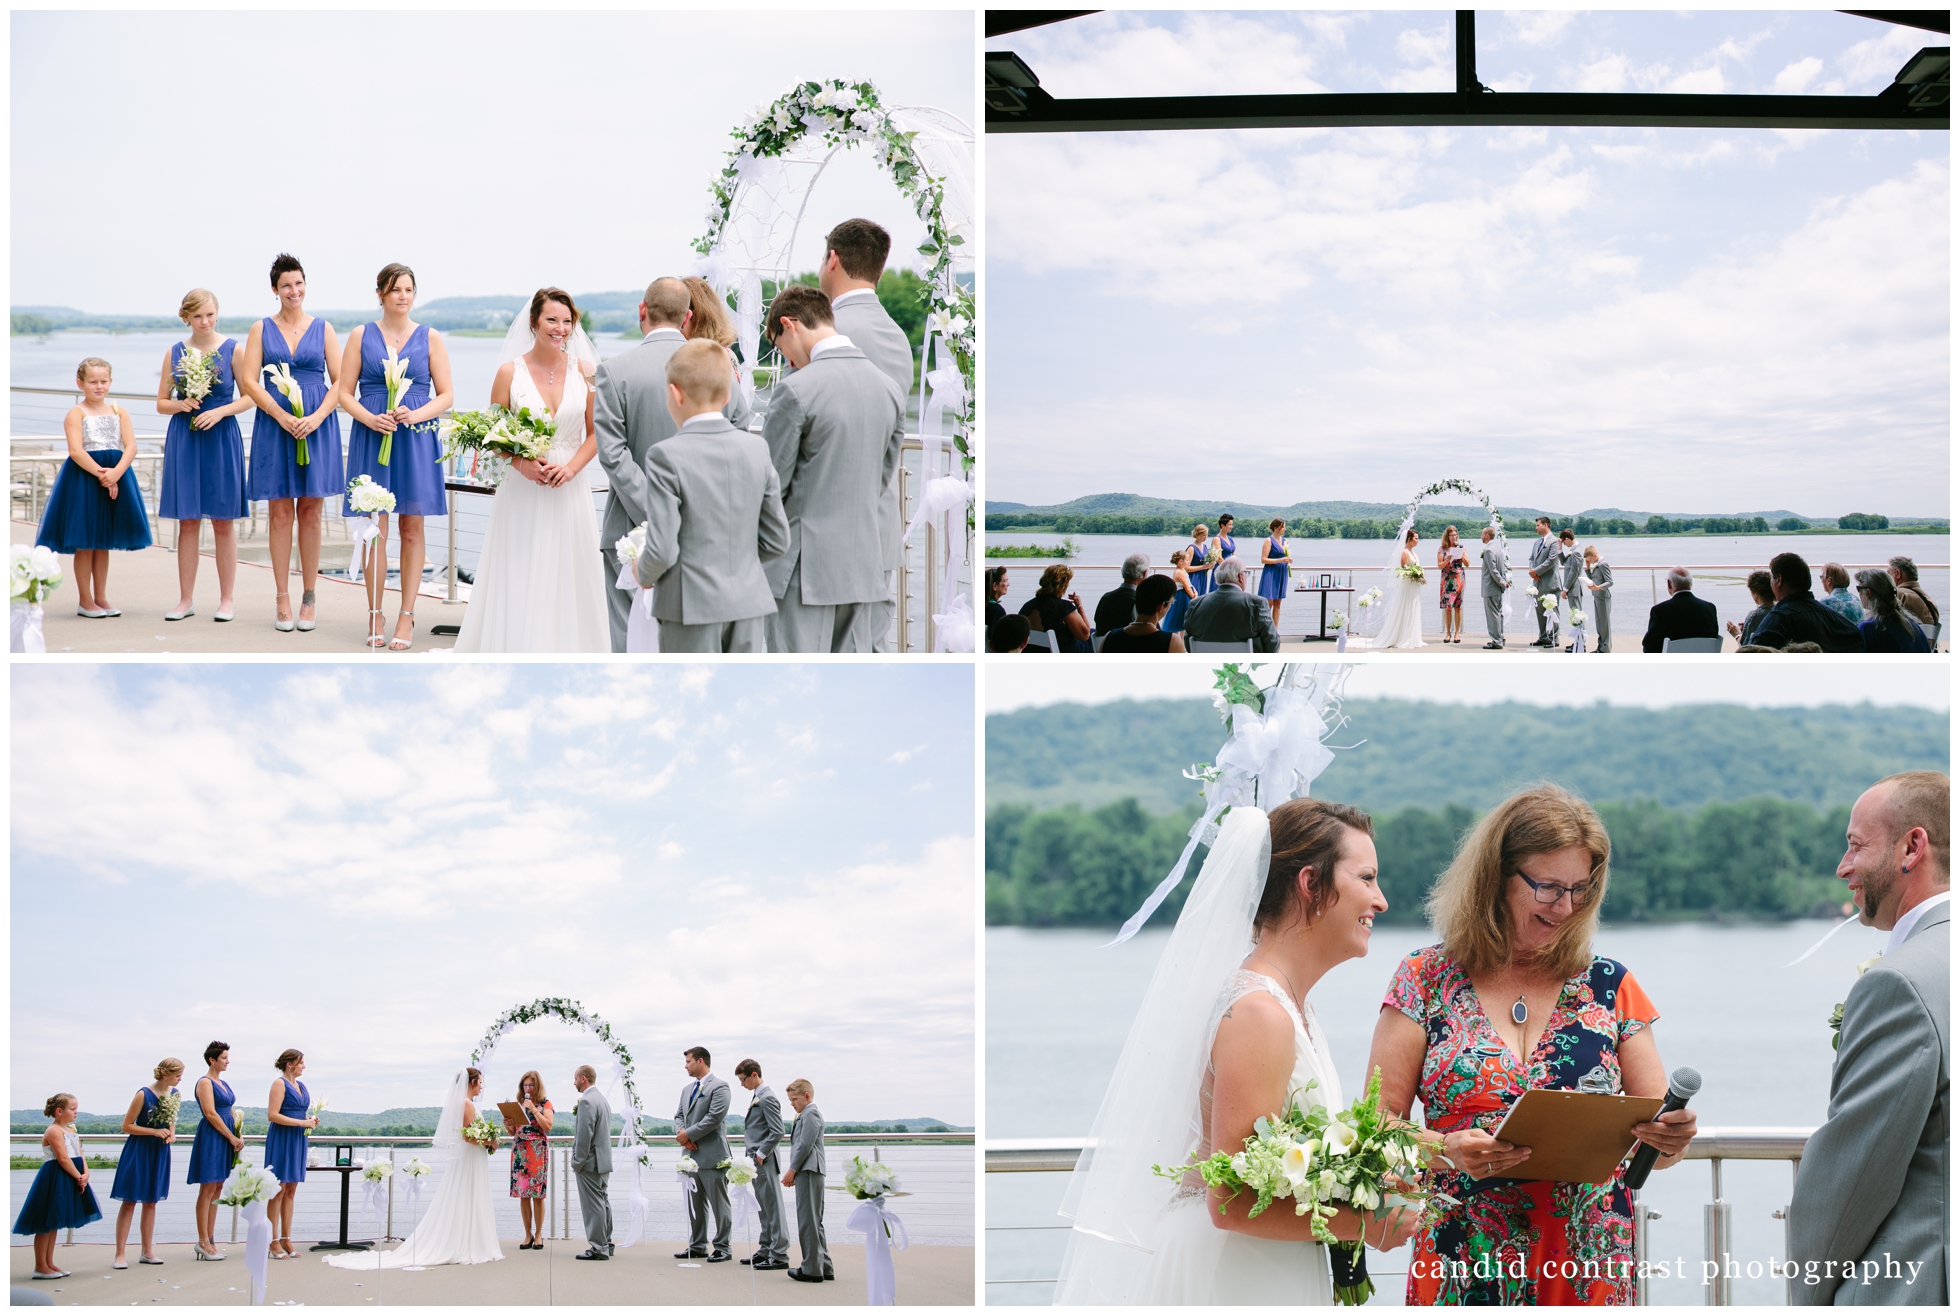 a bellevue iowa outdoor wedding at the shore event center, iowa wedding photographer candid contrast photography